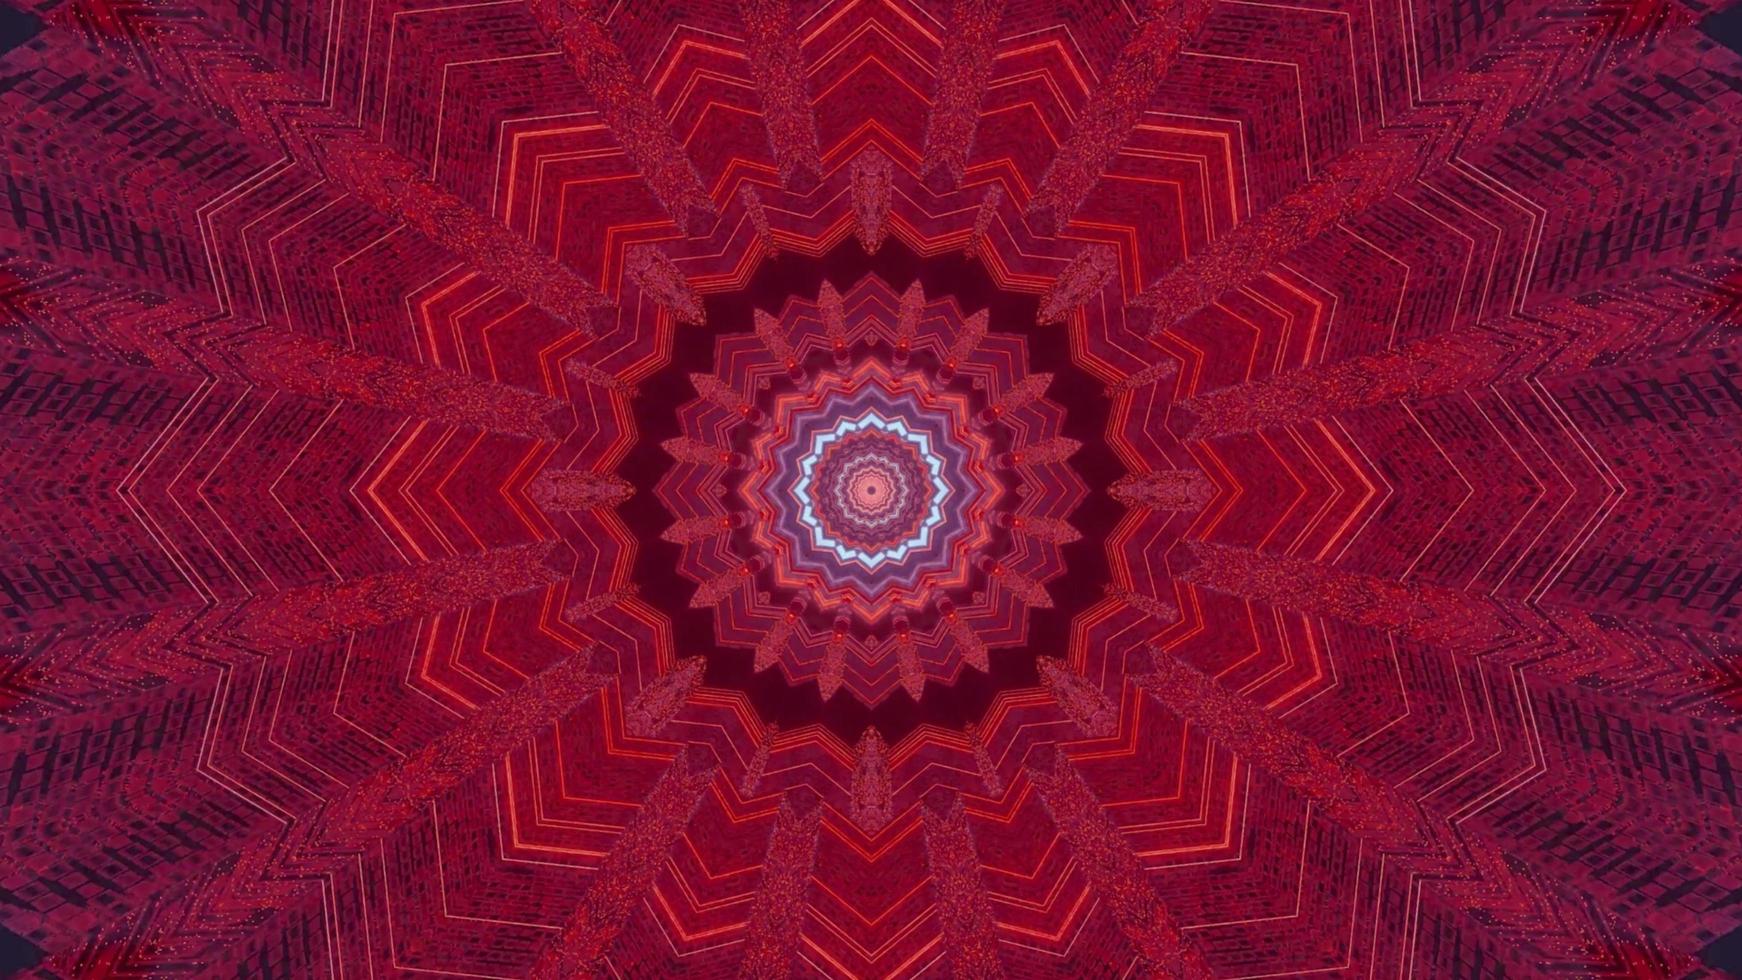 Red, blue, and purple floral 3D kaleidoscope design illustration for background or texture photo